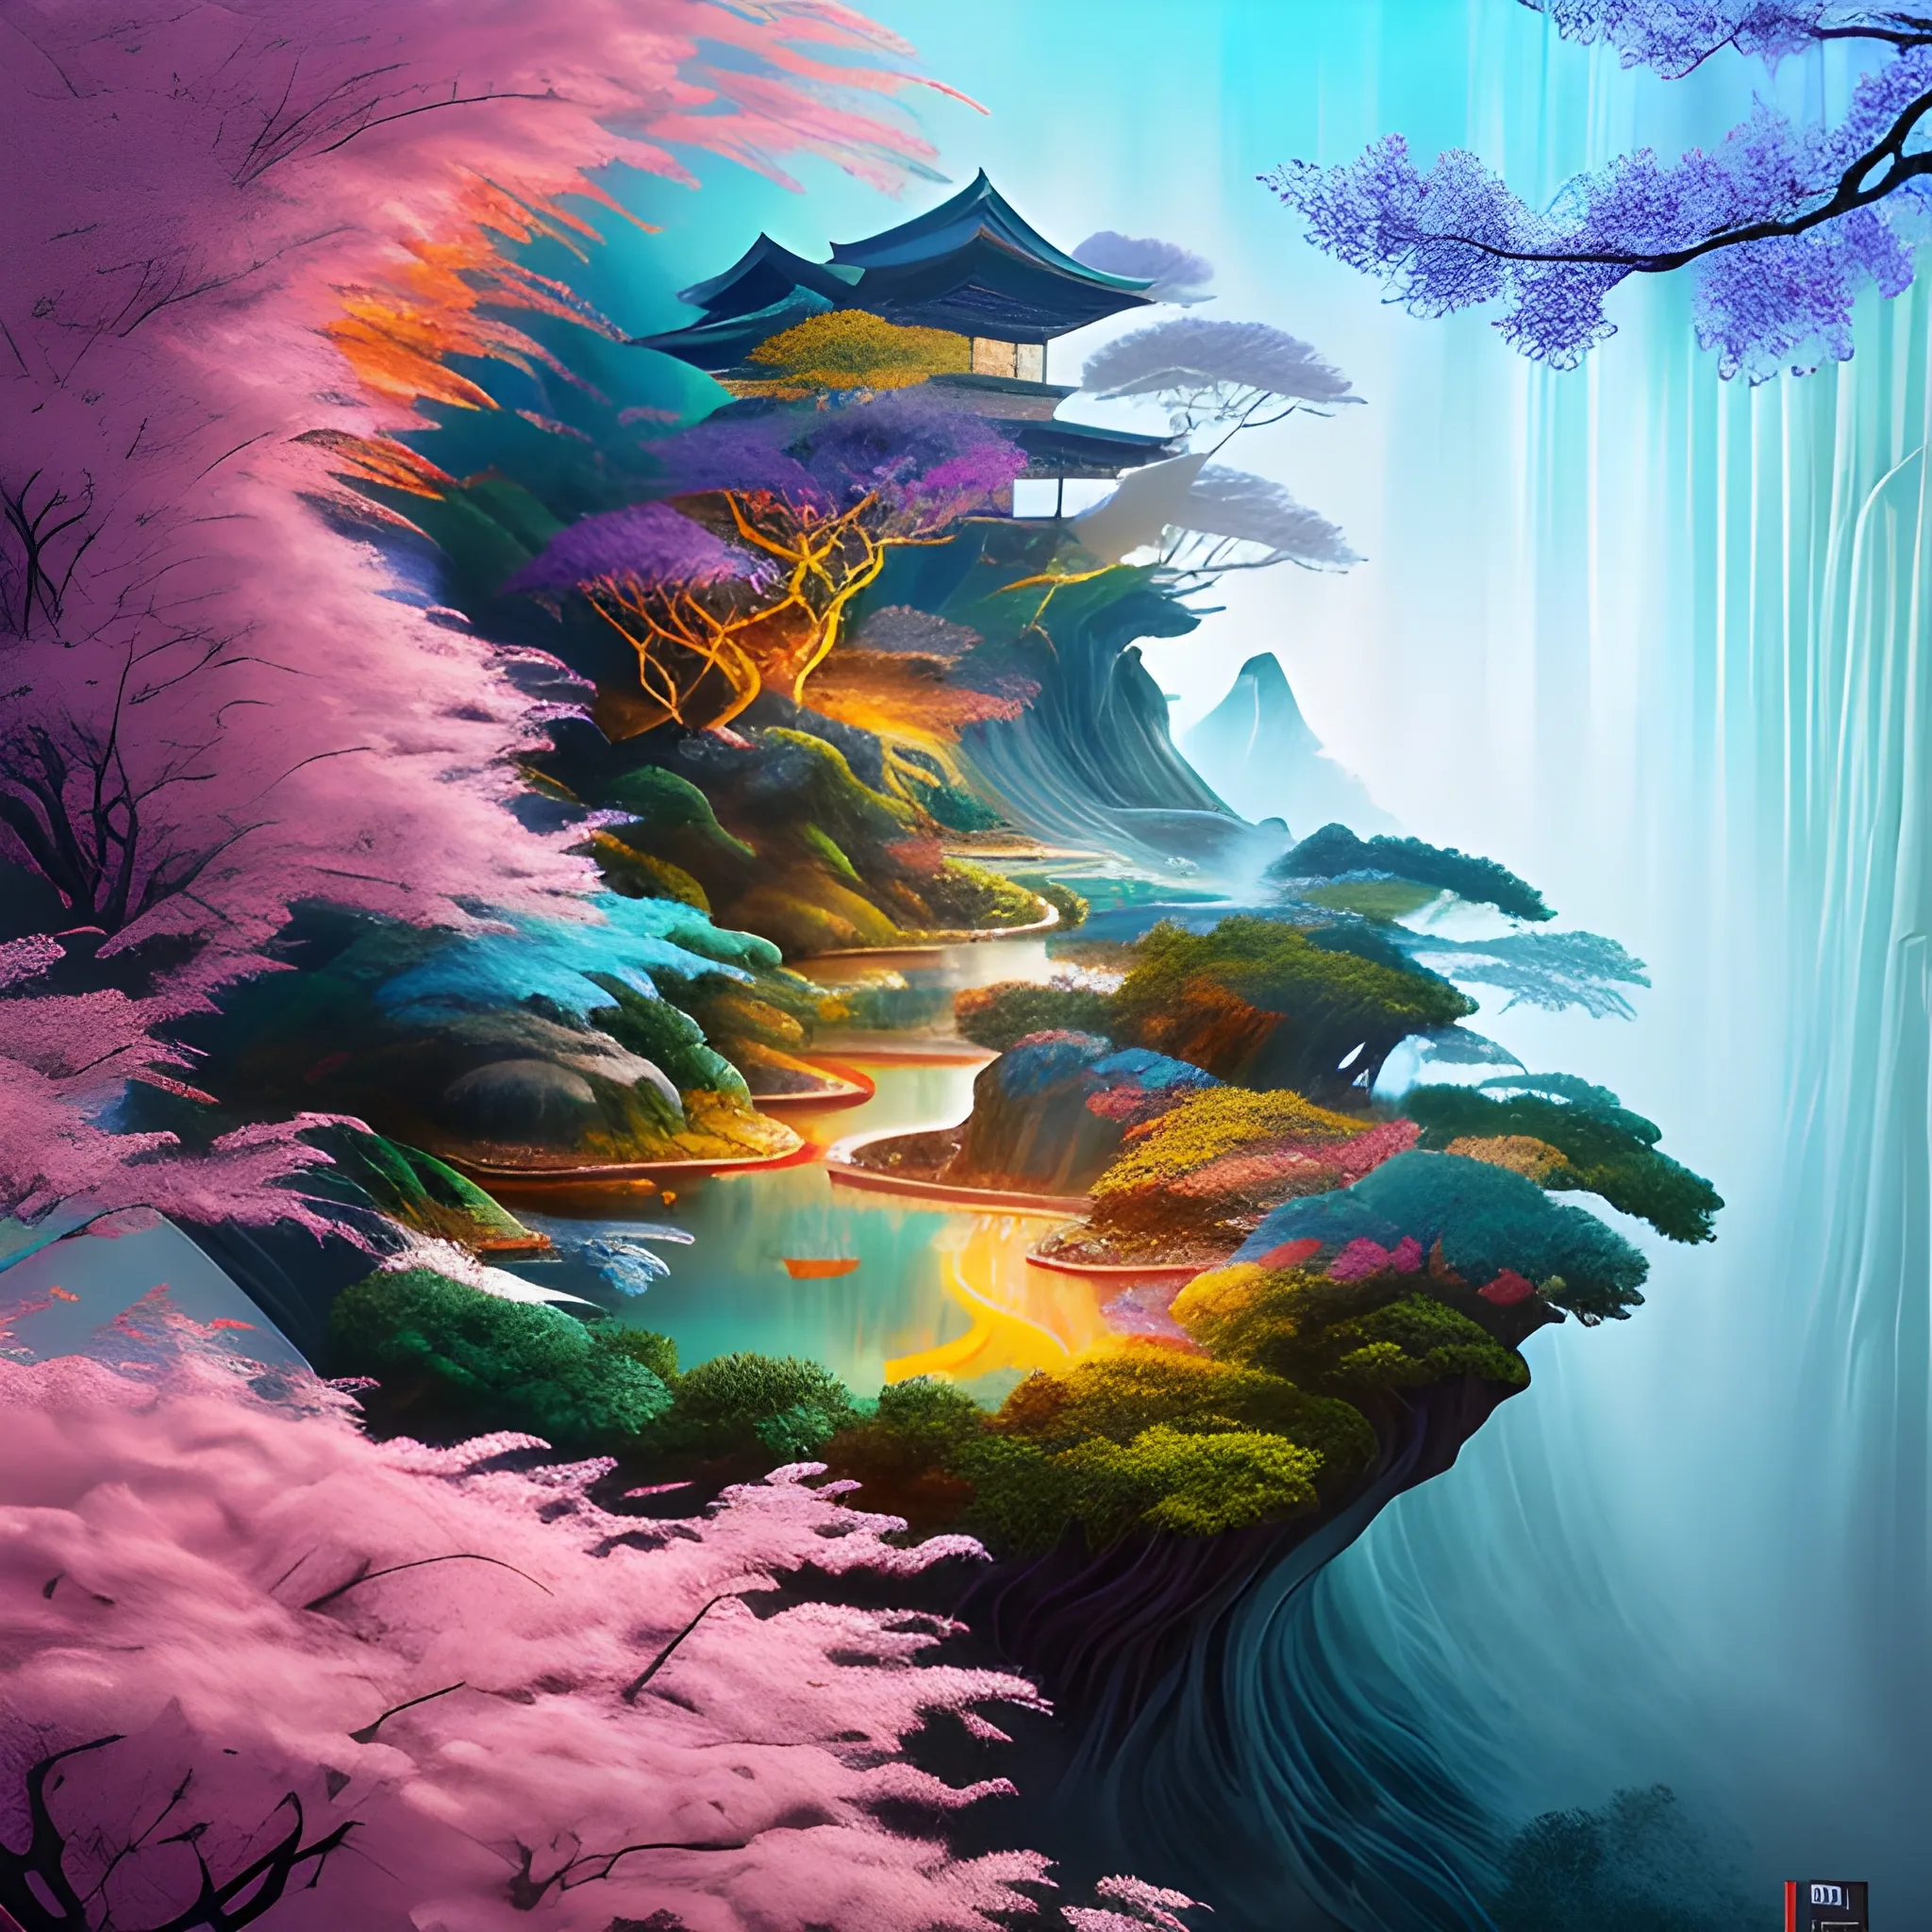 (by Ananta Mandal (and Andrew Biraj:0.5)), (in the style of nihonga), Style: Abstract, Medium: Digital illustration, Subject: A Guanshiyin Pusa in the middle of picture, An otherworldly landscape with floating islands, cascading waterfalls, and vibrant flora and fauna. Camera Angle: Overhead shot capturing the vastness and intricate details of the scene. The colors are saturated, and the lighting creates a warm and ethereal atmosphere. The painting is highly detailed, with every brushstroke capturing the complexity of the imaginary world., (high quality), (detailed), (masterpiece), (best quality), (highres), (extremely detailed), (8k), seed:792333689